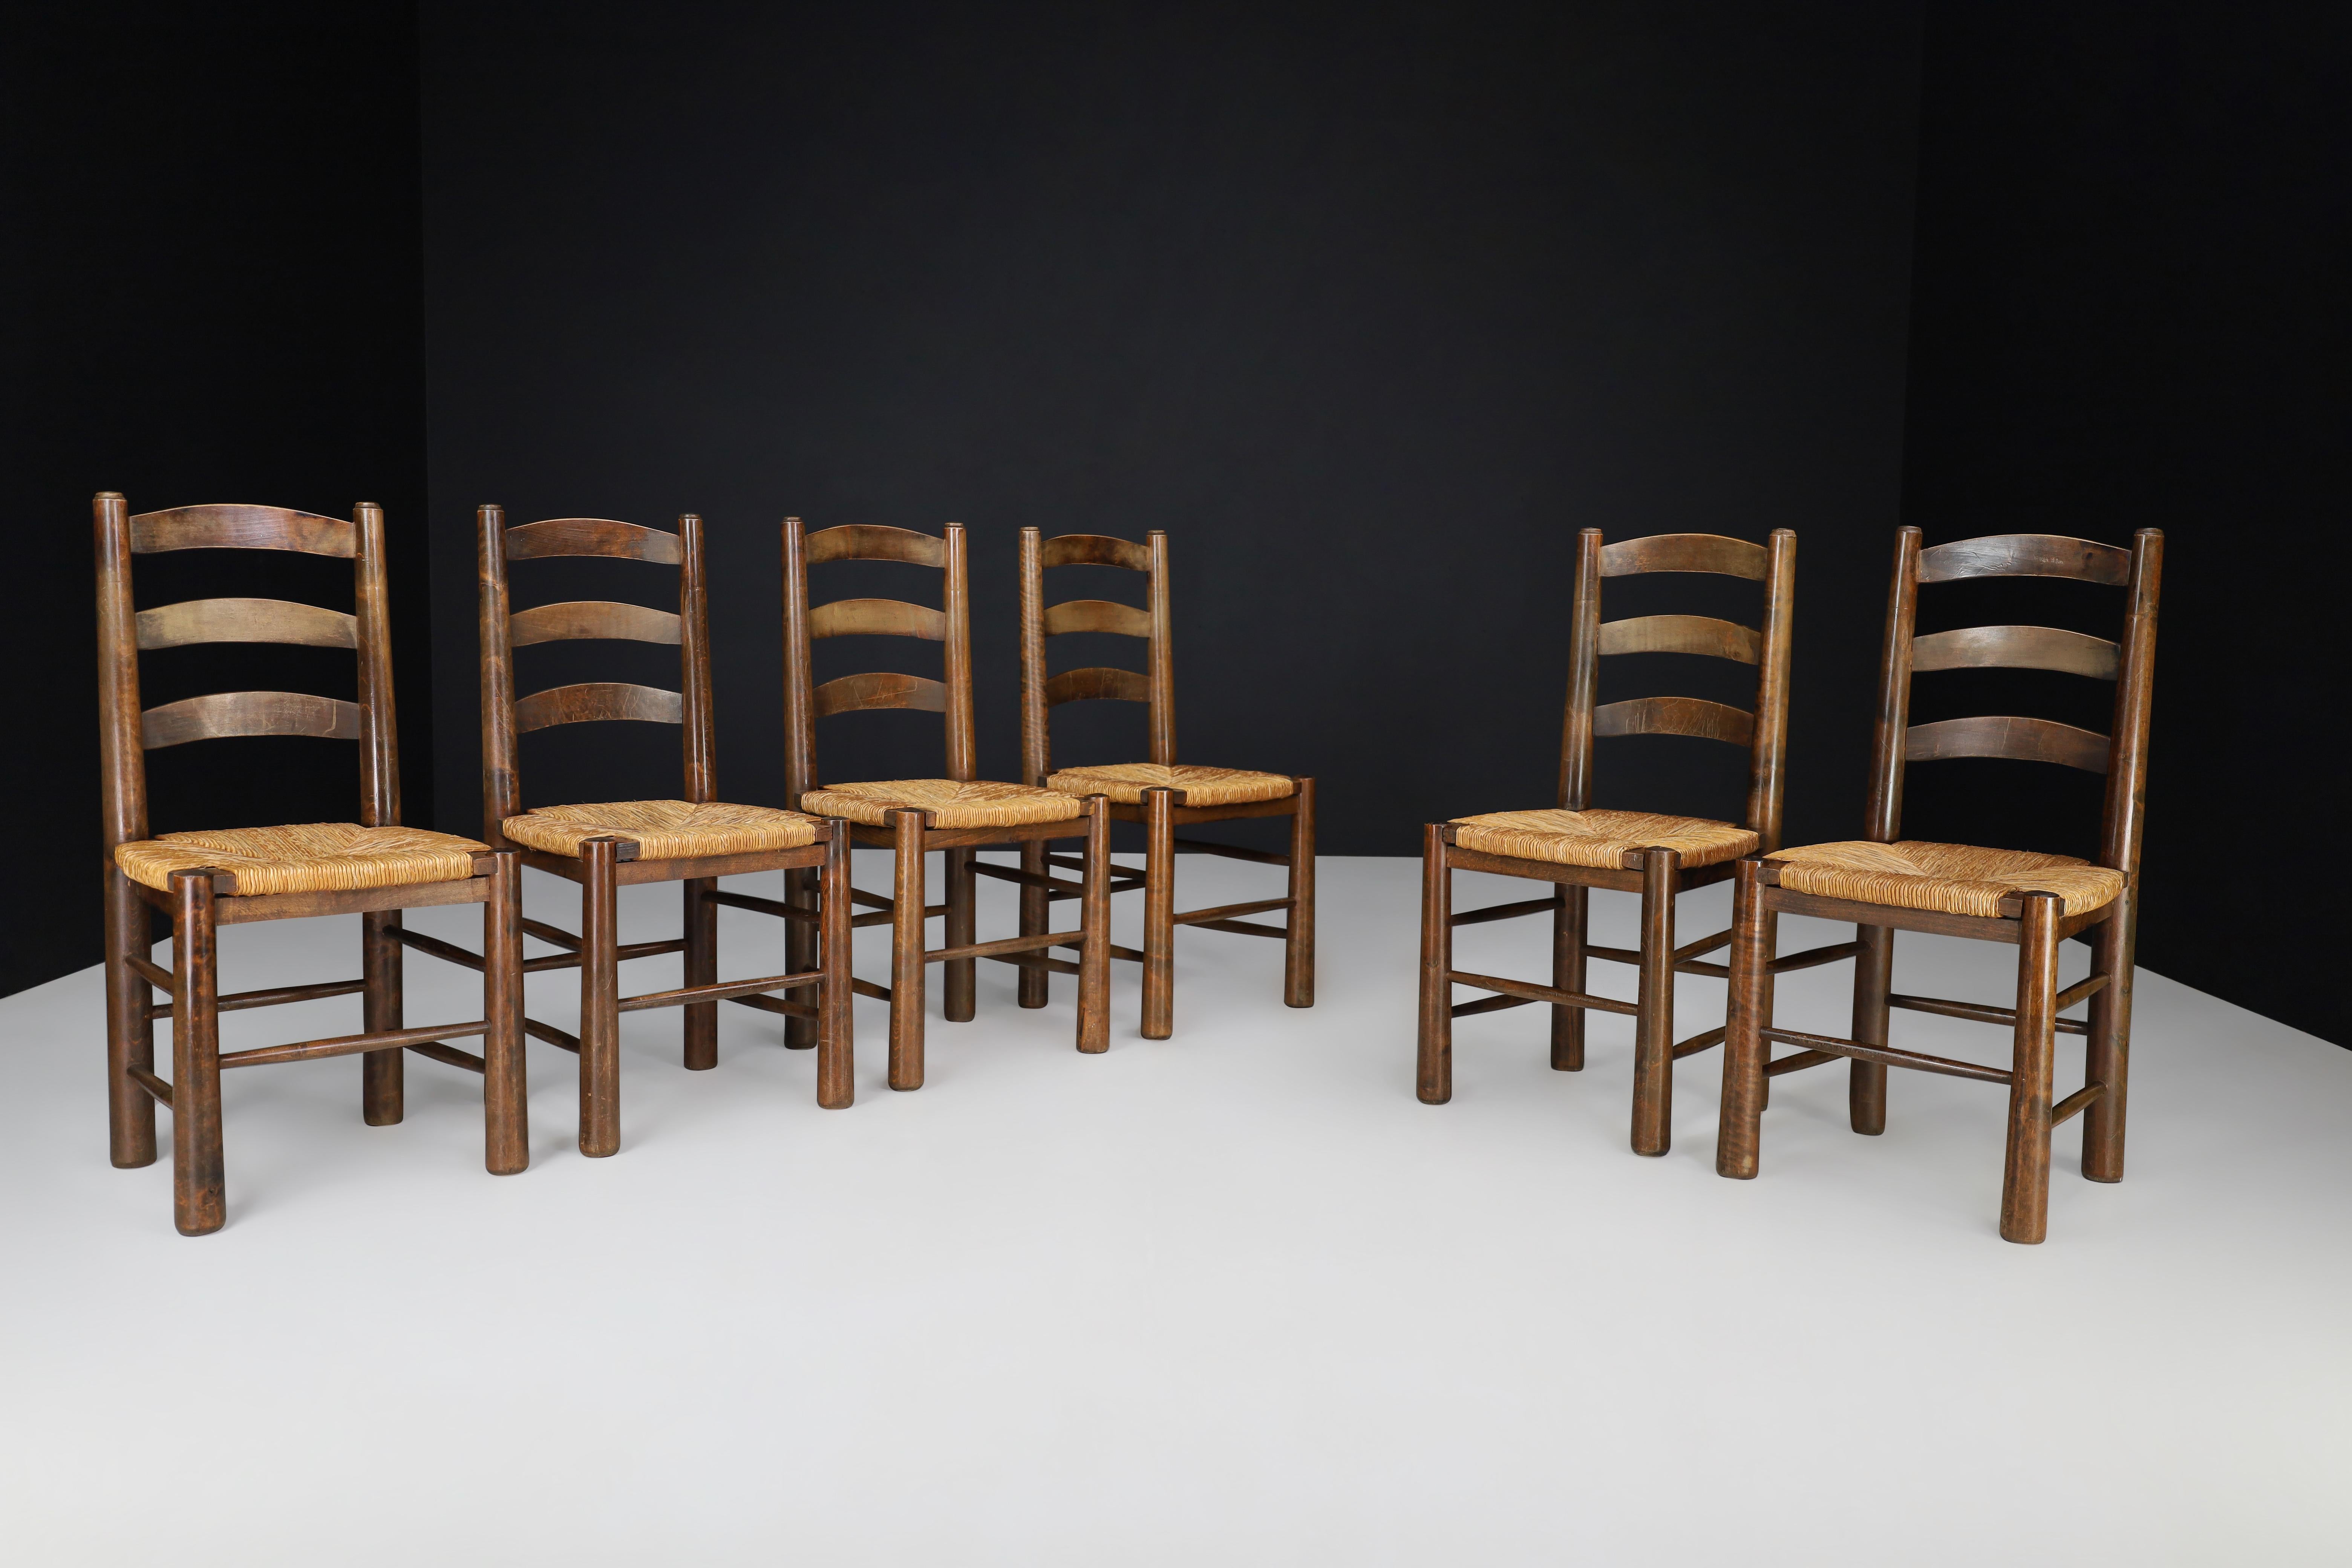 Georges Robert dining chairs in oak and rush, France 1950s.

These are six chairs from the 1950s, made by a French cabinetmaker named Meubles Georges Robert. They are perfect for a mountain or chalet setting and have a solid oak structure with